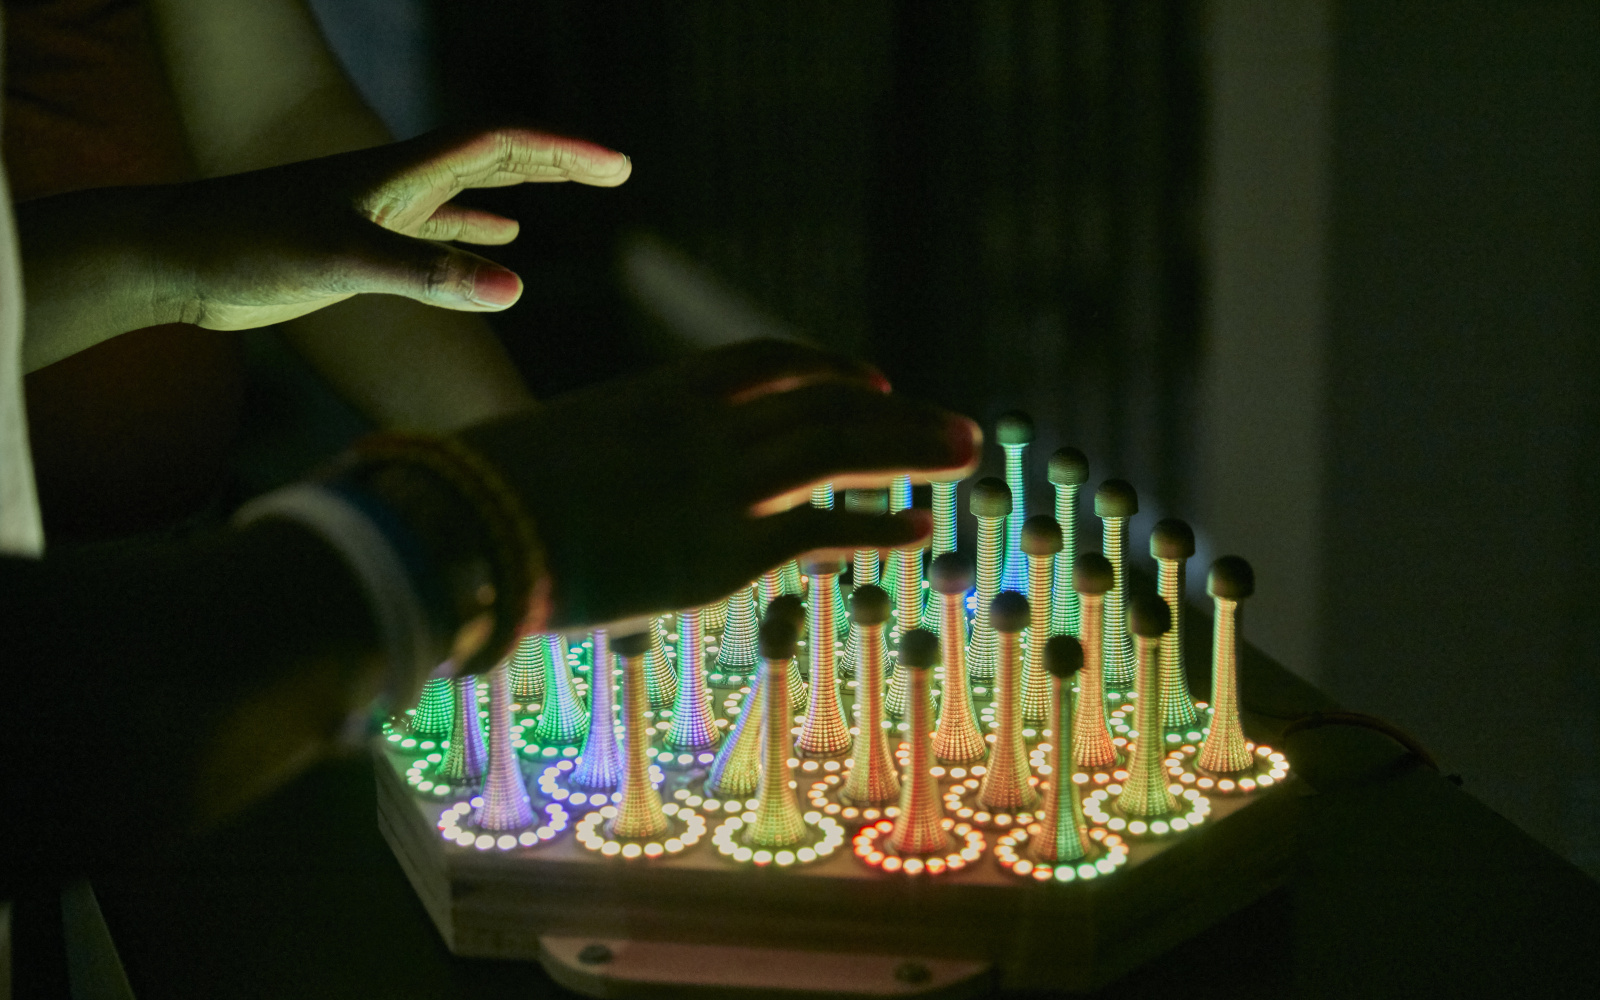 Hands above the artwork »Wobble Garden«, which consists of metal springs and LED circles.